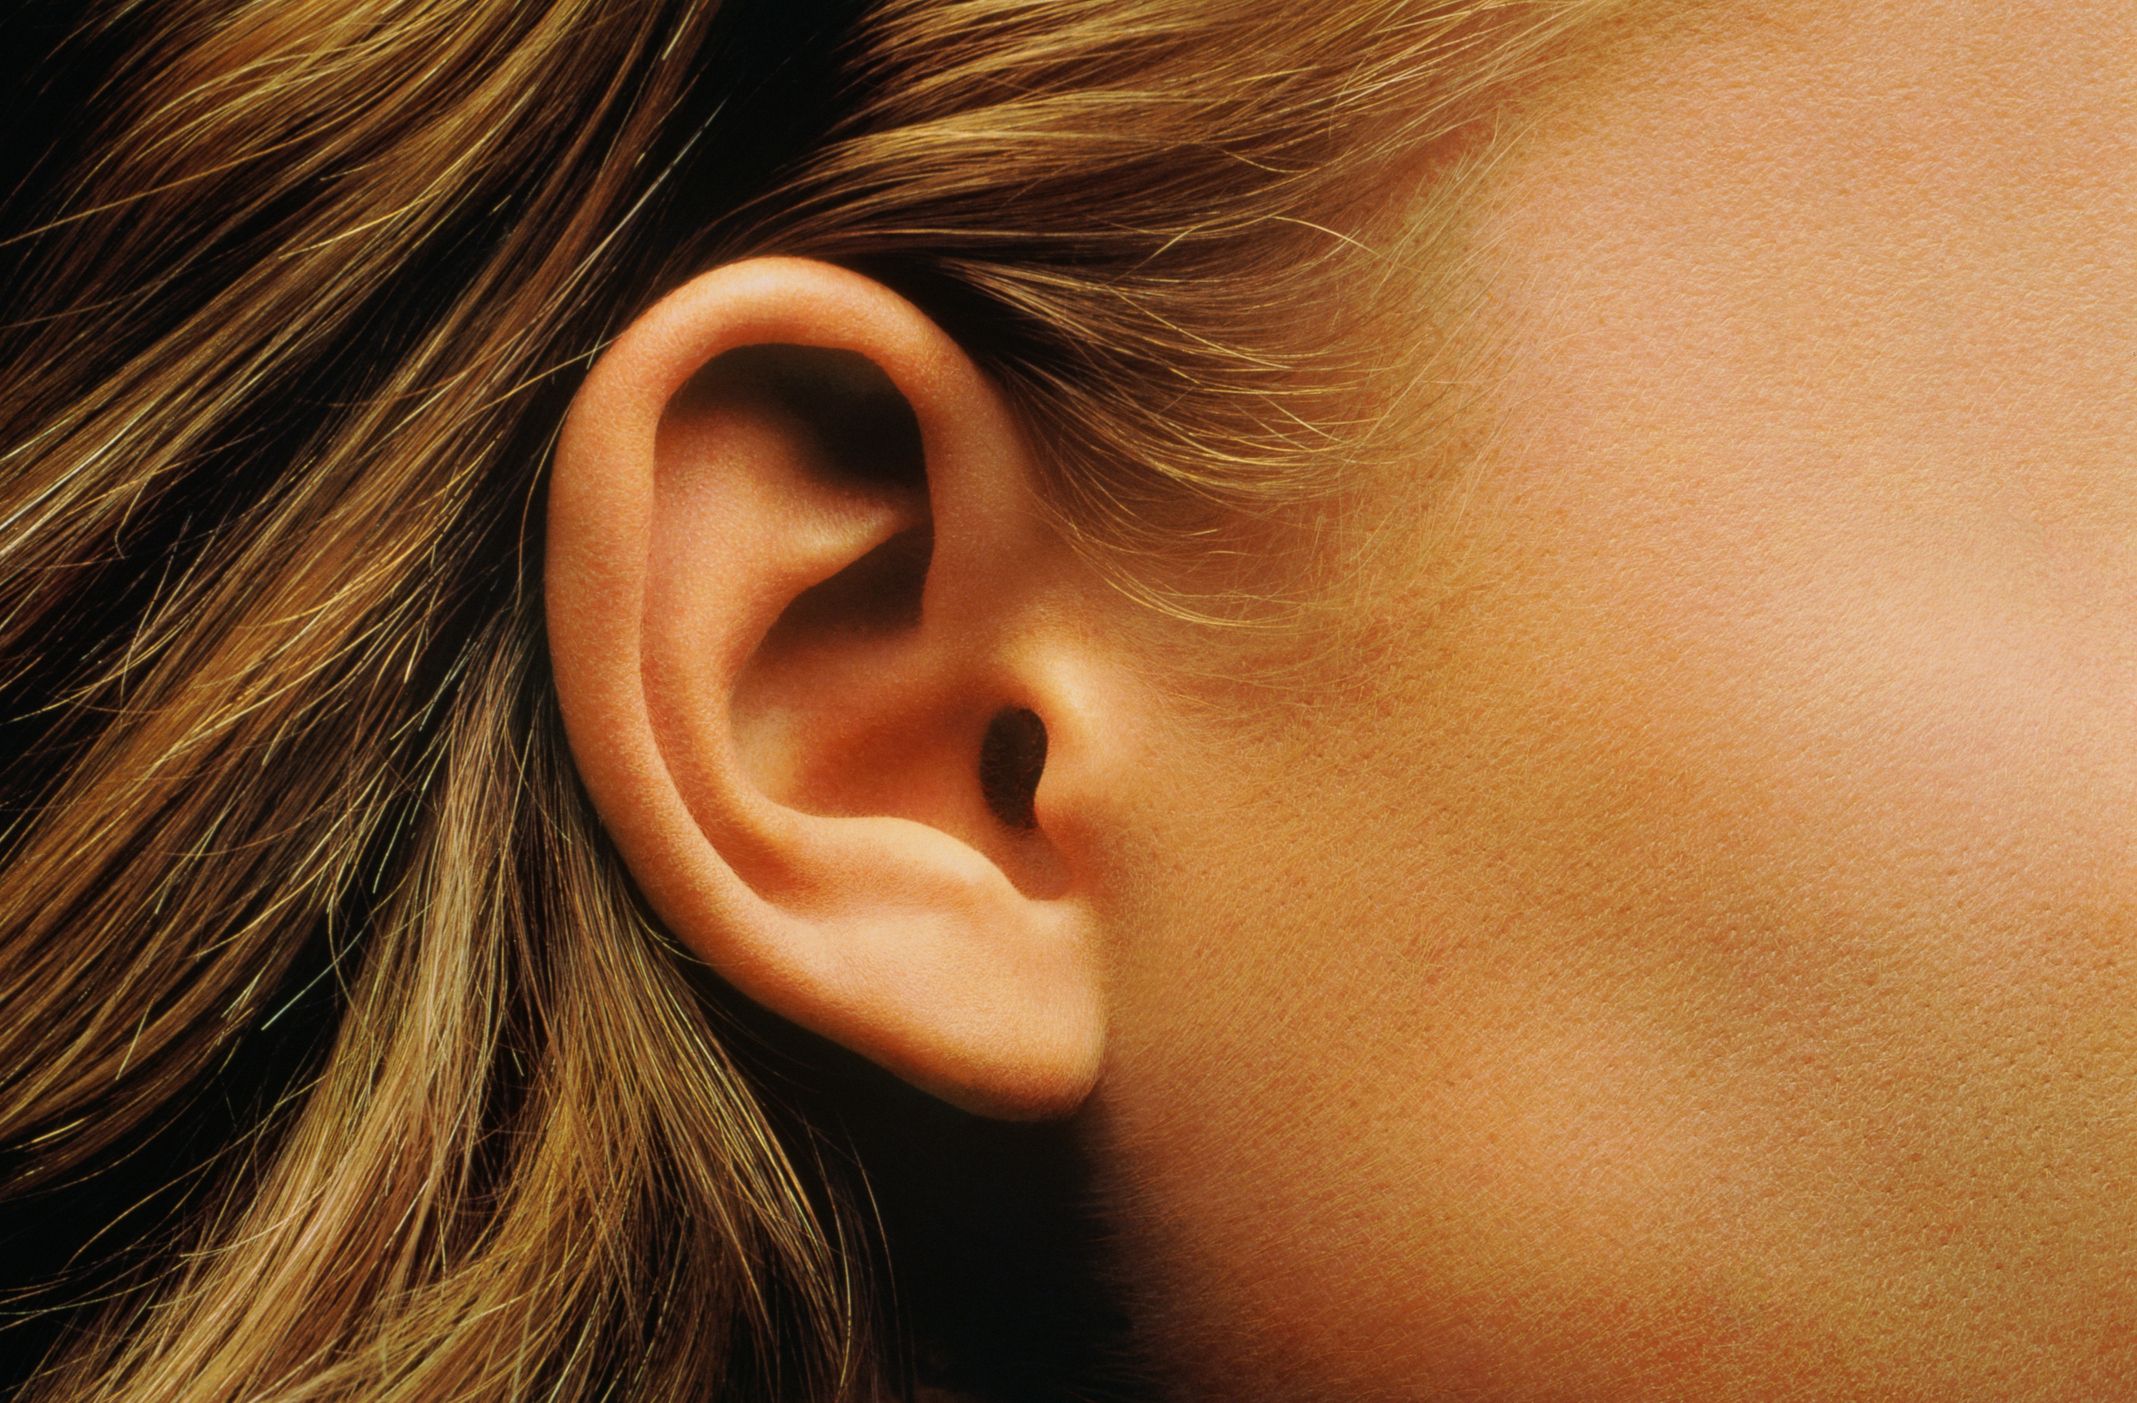 New Tinnitus Therapy Can Quiet Torturous Ringing in the Ears